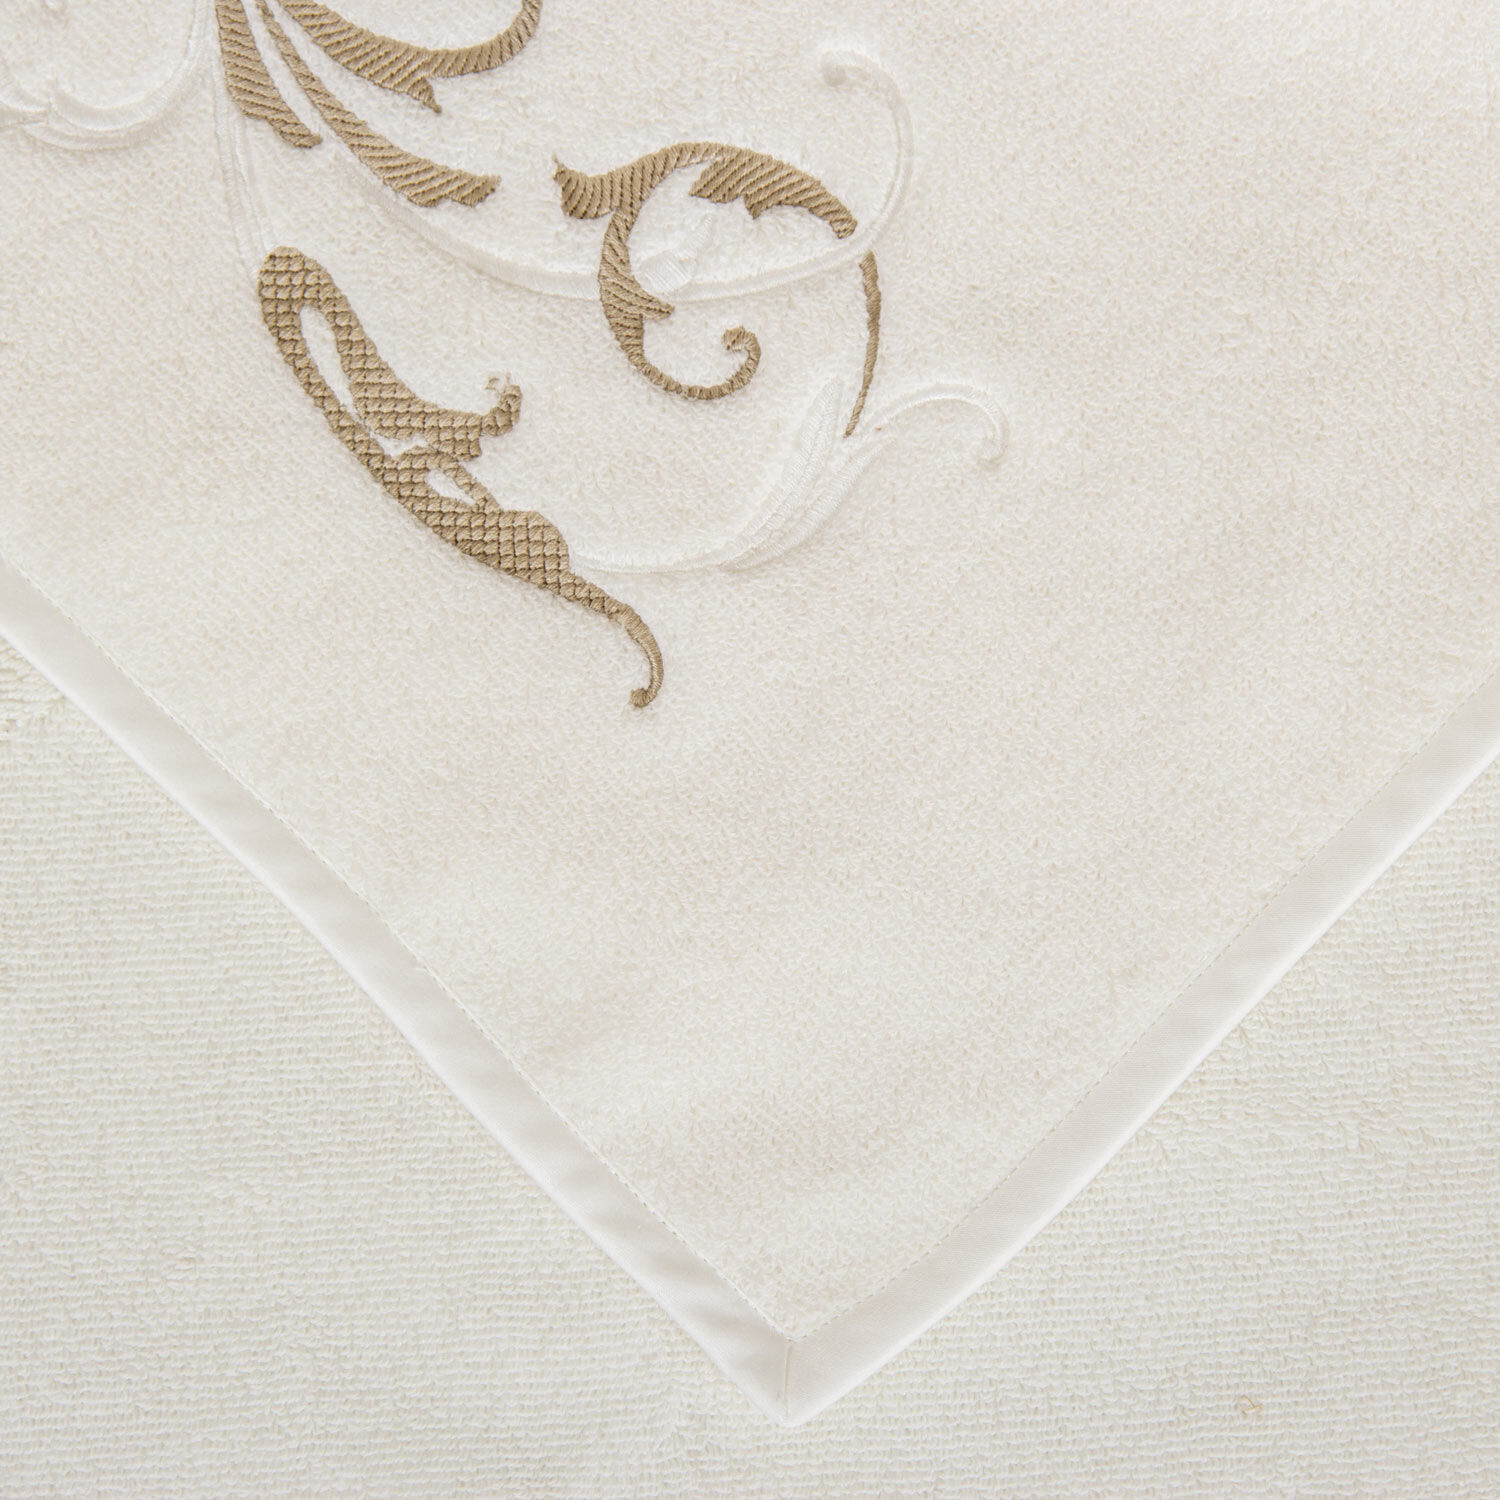 slide 2 Tracery Embroidered Hand Towel